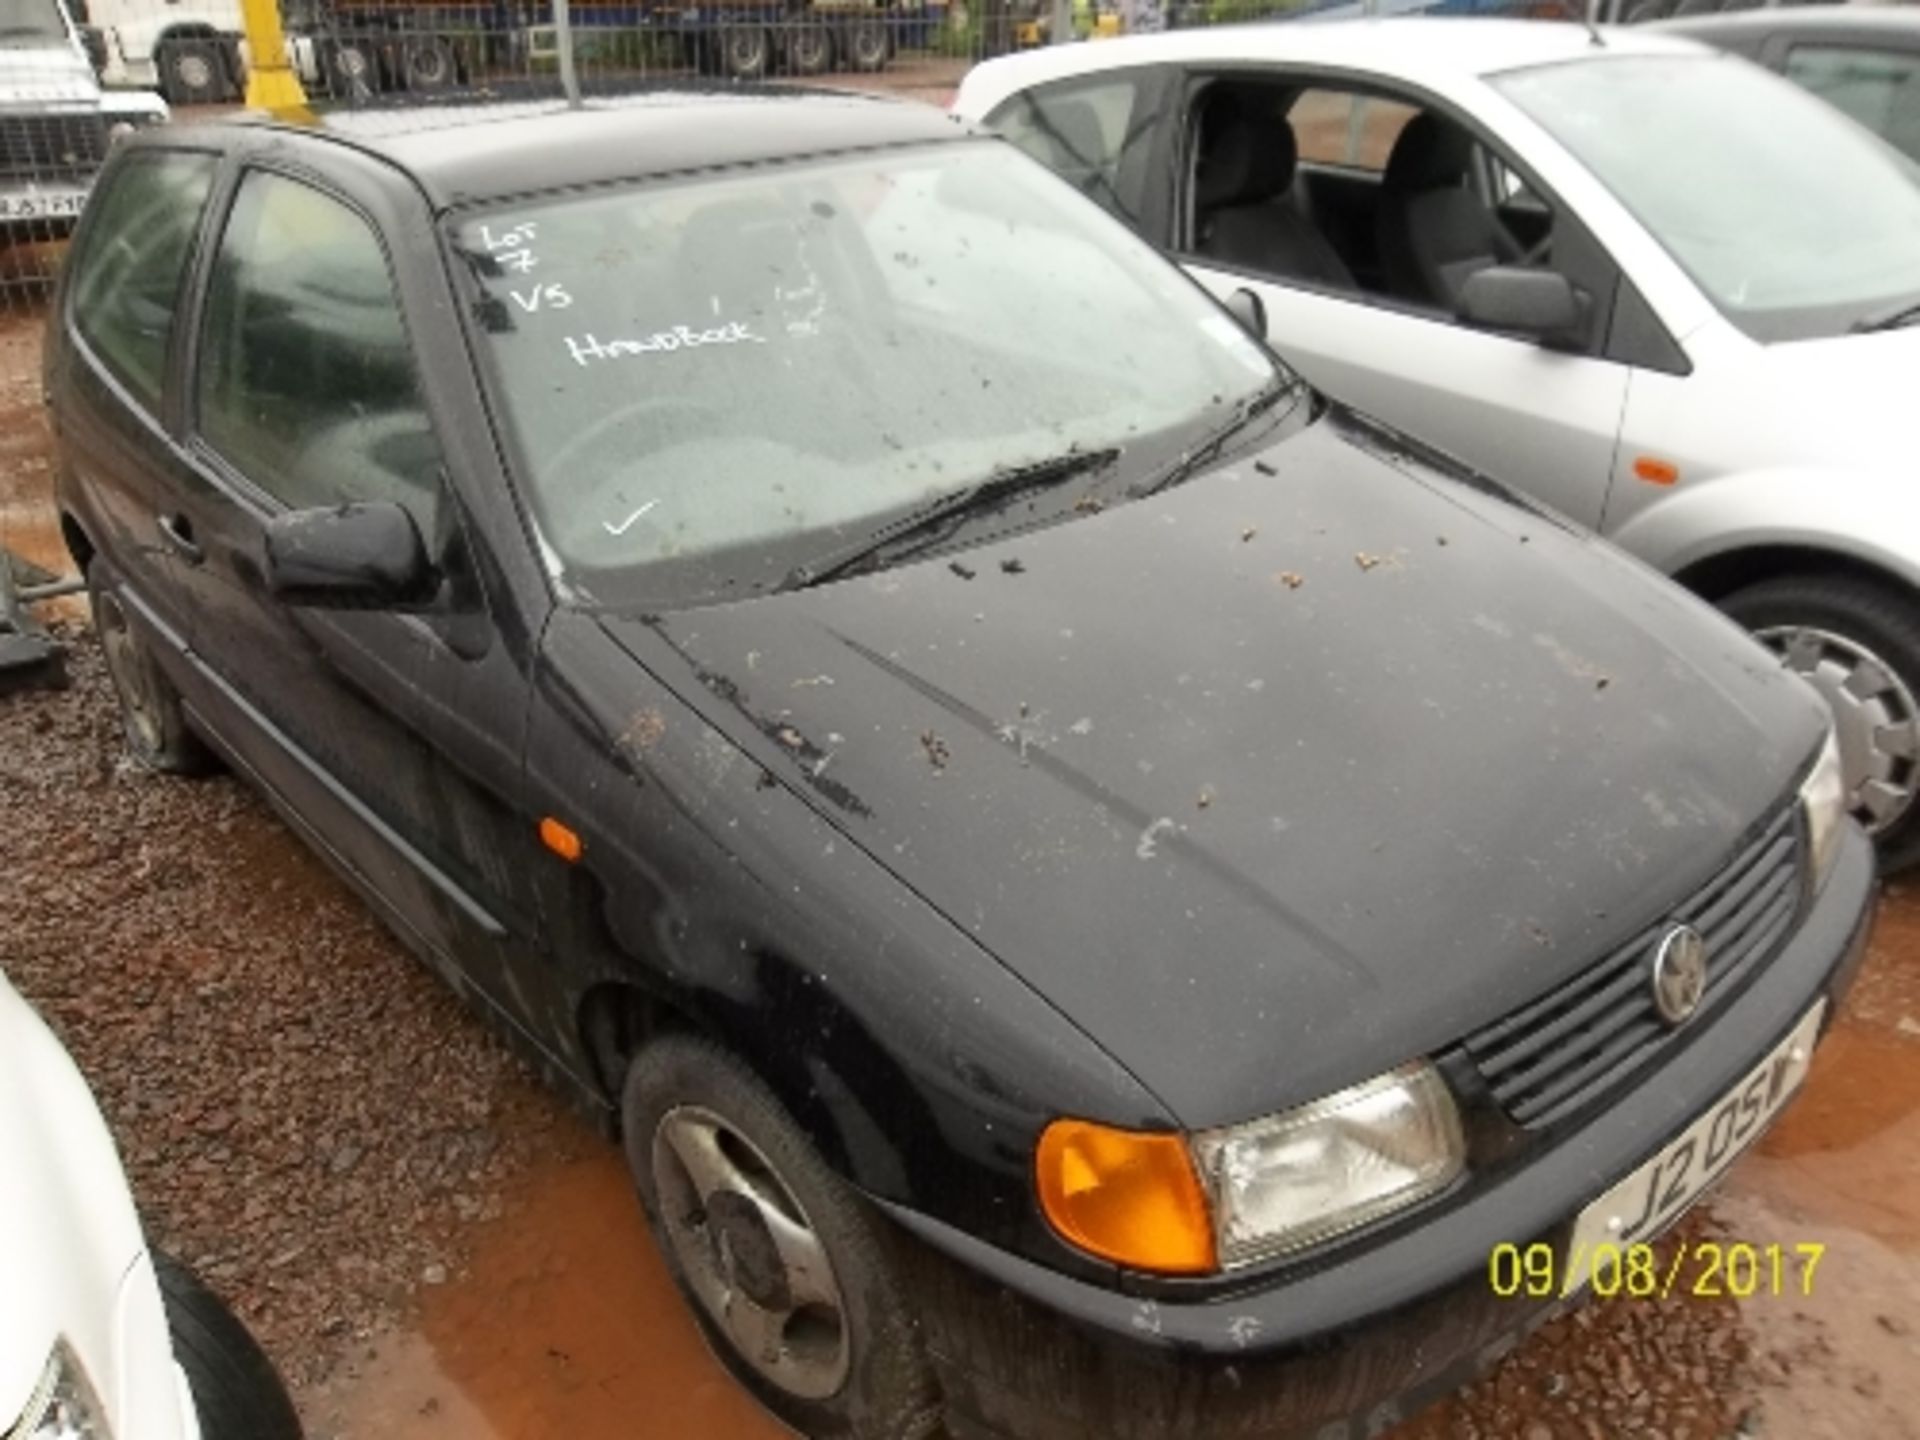 Volkswagen Polo 1.4 CL - J2 OSW Date of registration: 16.08.1996 1390cc, petrol, manual, black - Image 2 of 5